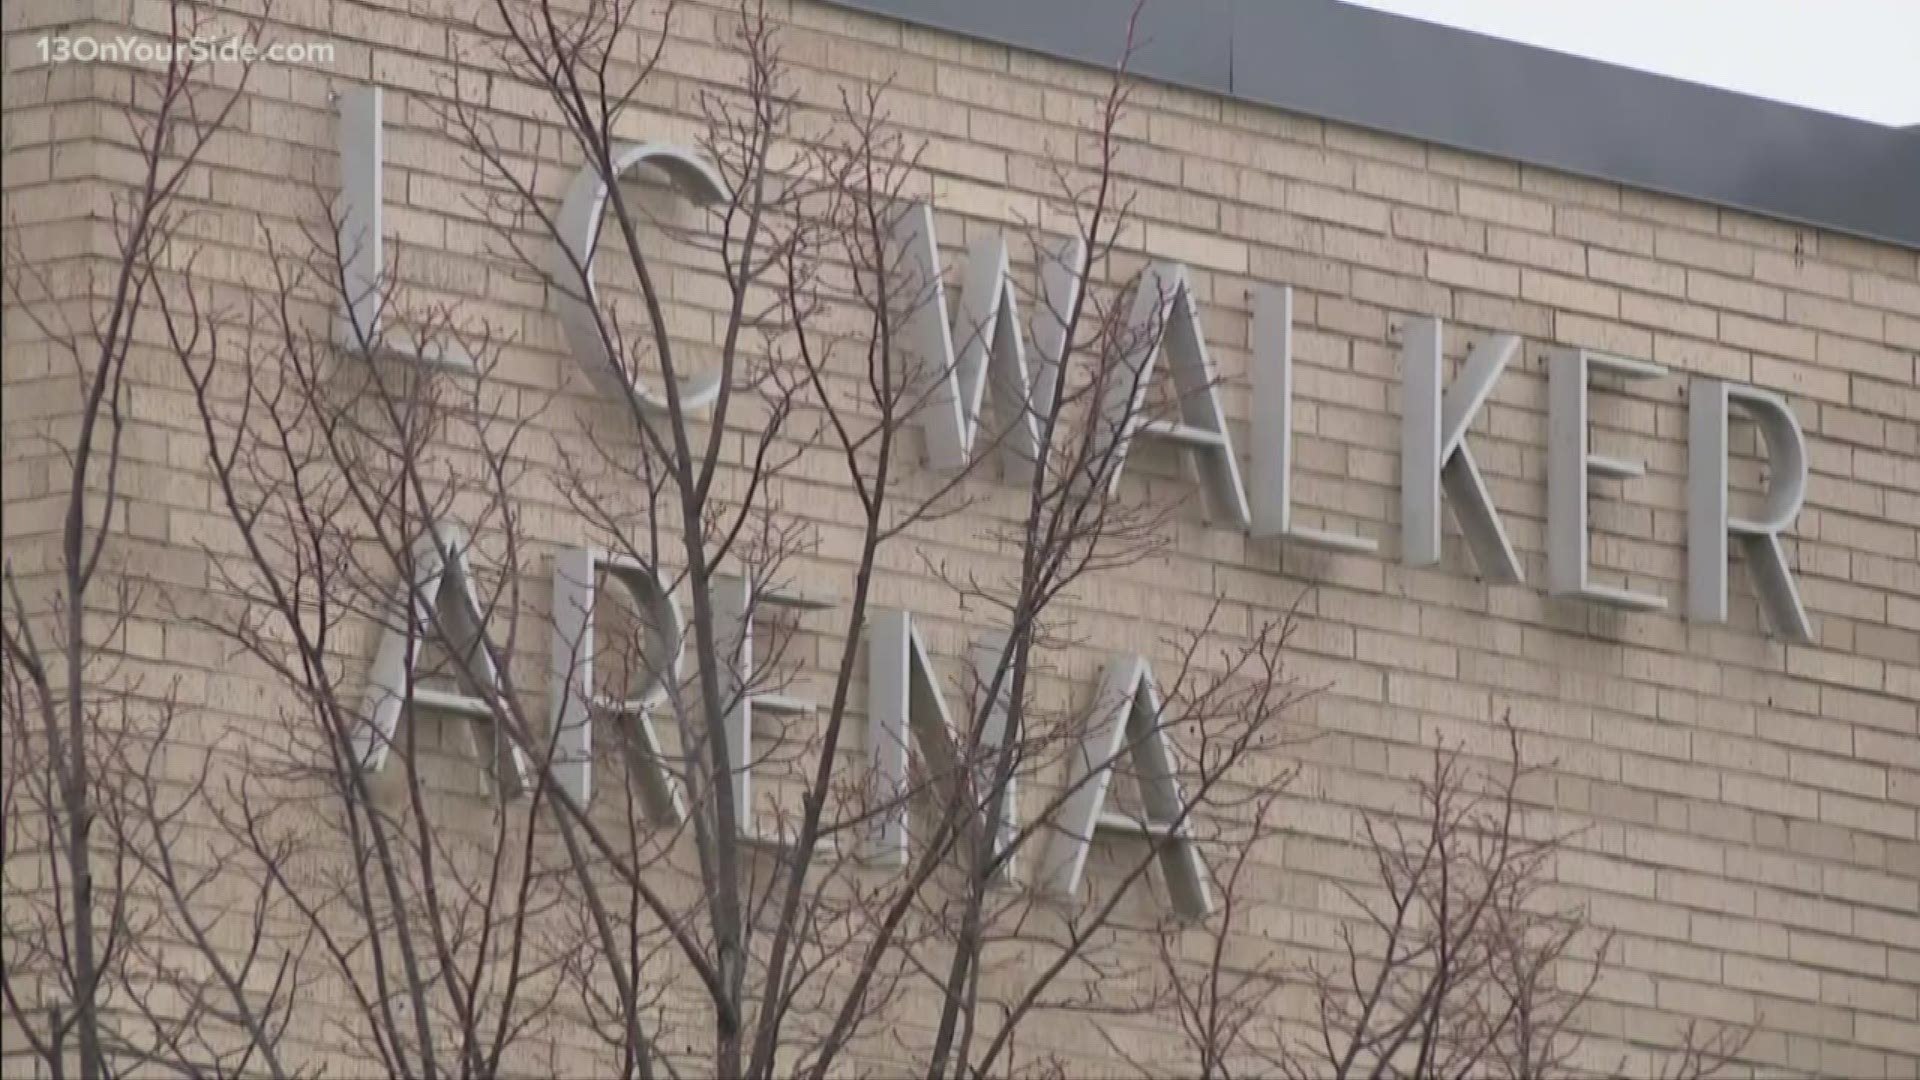 We could know Tuesday night if L.C. Walker Arena in Muskegon will stay L.C. Walker Arena, or become Mercy Health Arena.